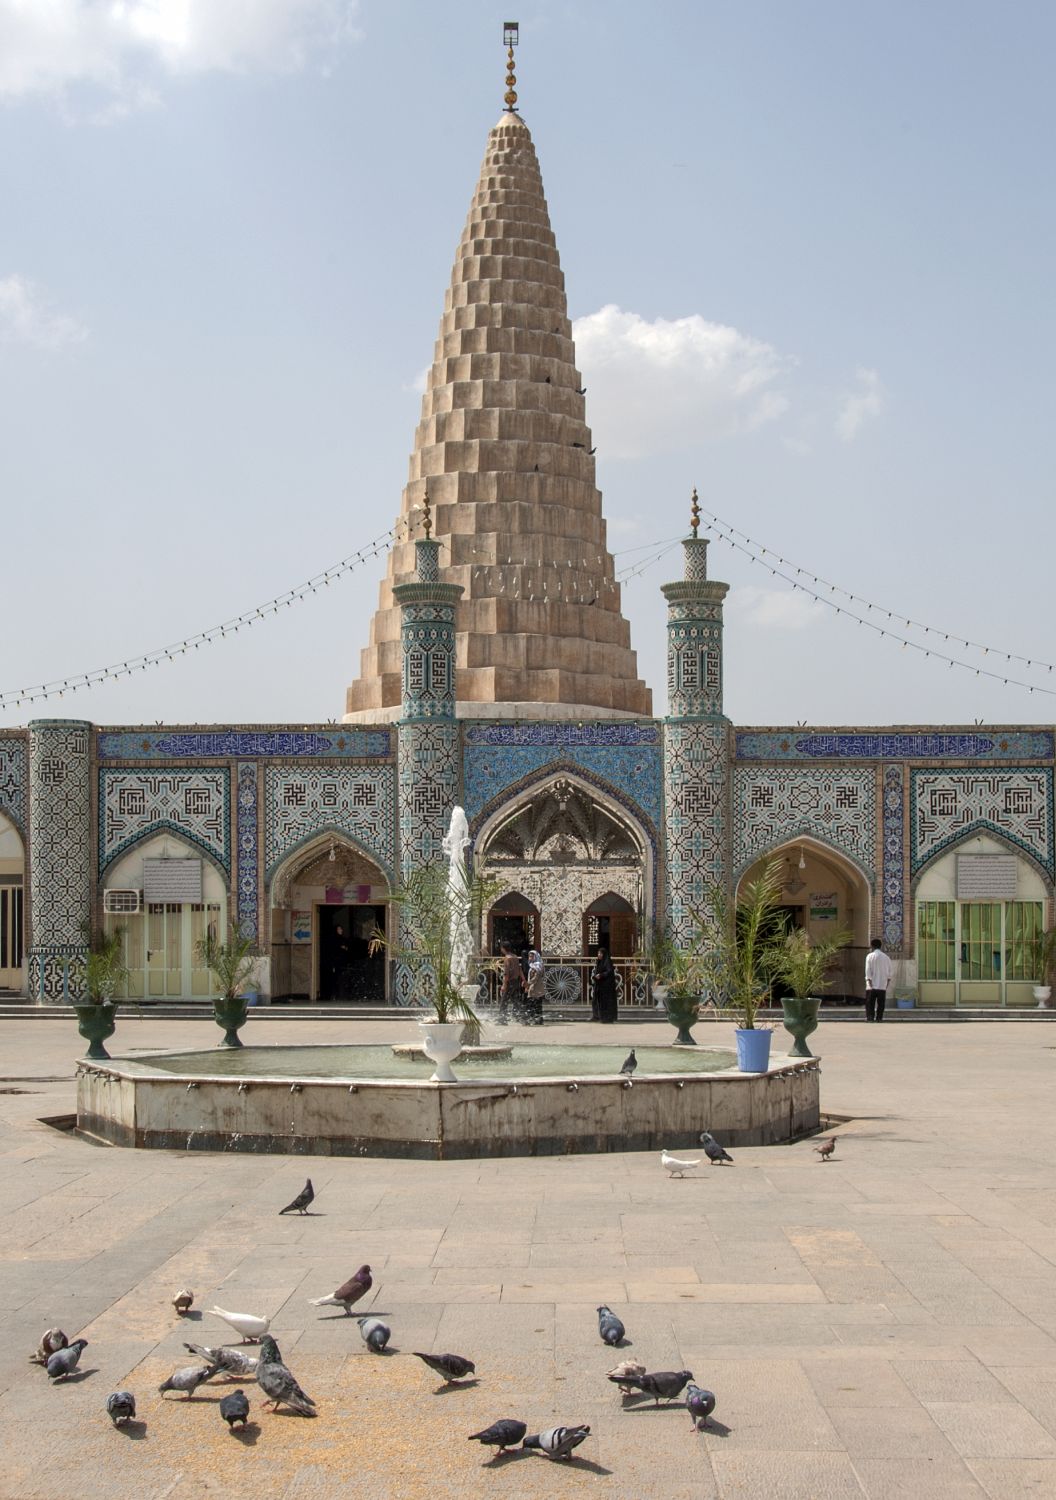 View of forecourt showing fountain and entrance to tomb chamber. Muqarnas dome rises in background.